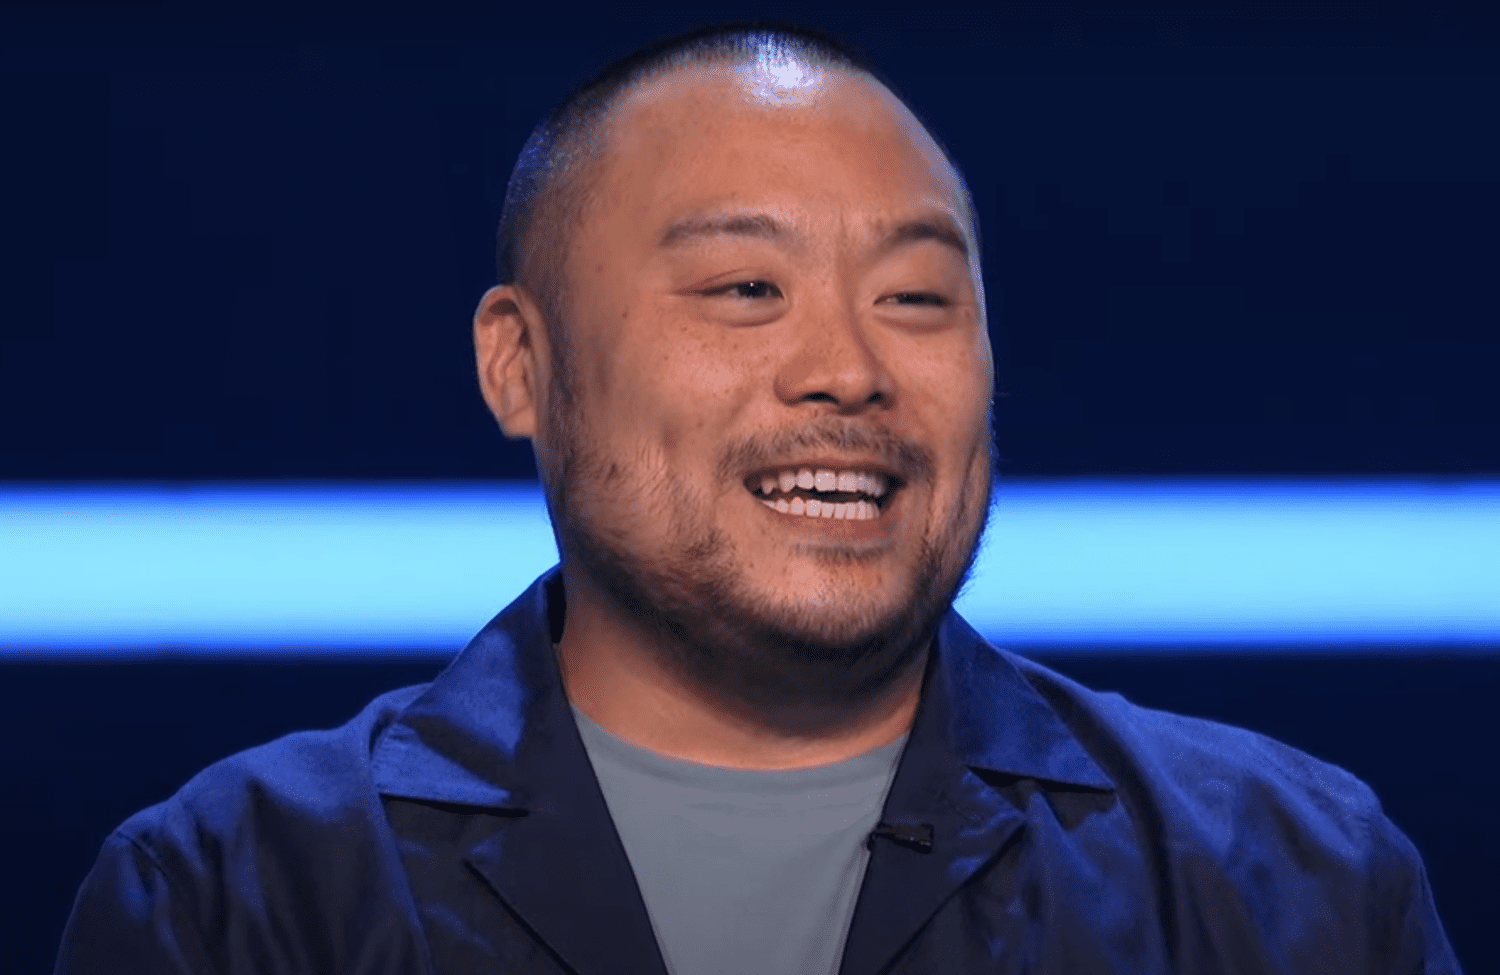 Chef David Chang makes 'Who Wants to Be a Millionaire' history by winning $1 million prize - Entertainment Weekly